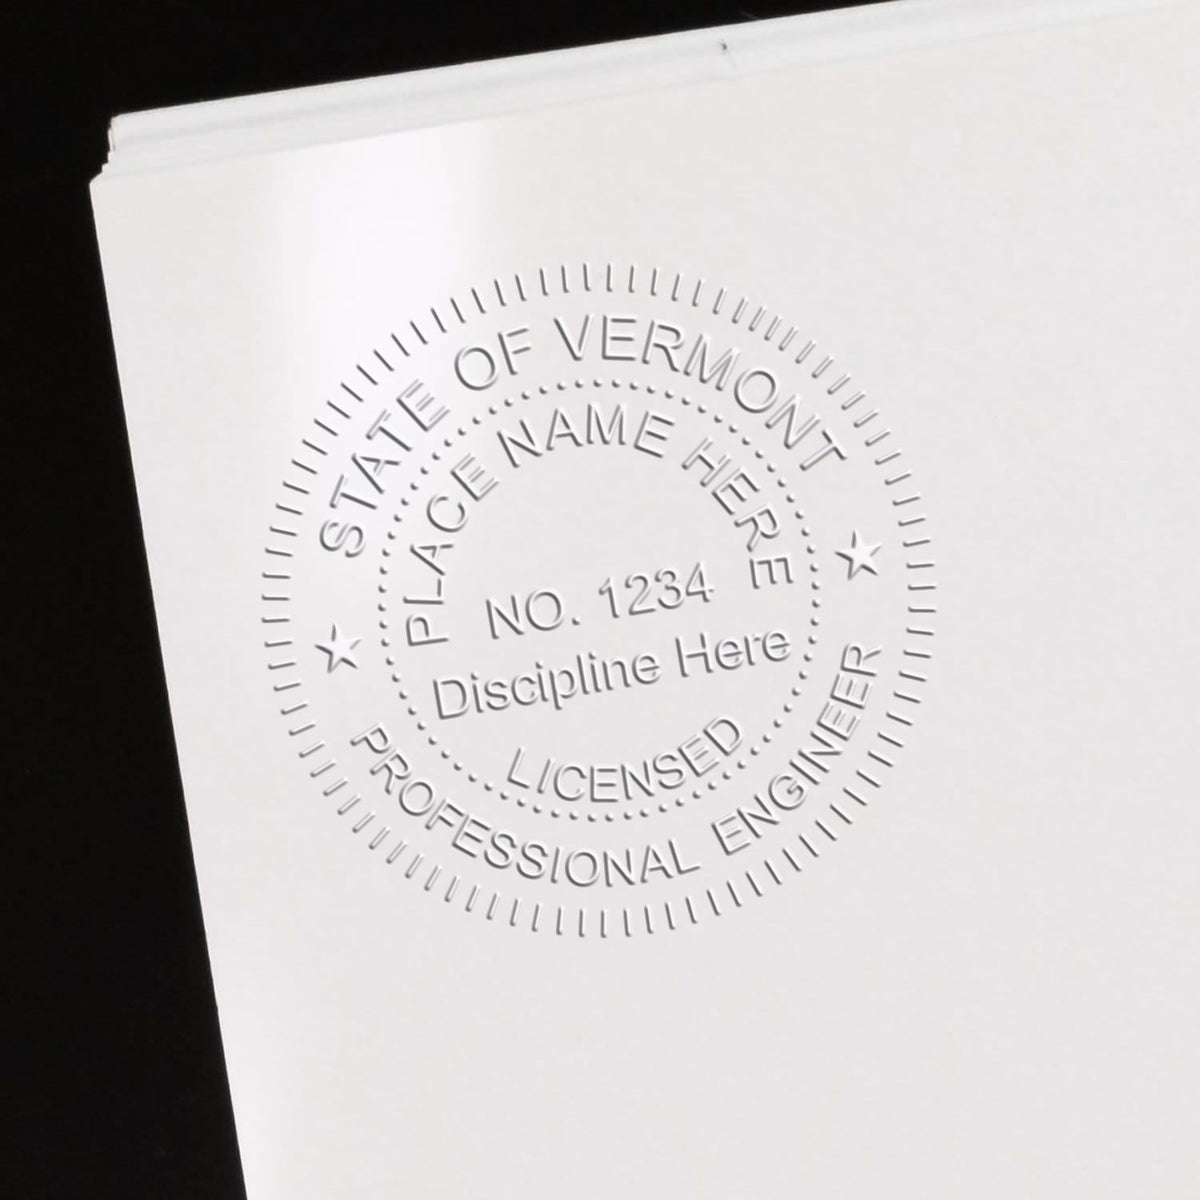 A stamped impression of the Soft Vermont Professional Engineer Seal in this stylish lifestyle photo, setting the tone for a unique and personalized product.